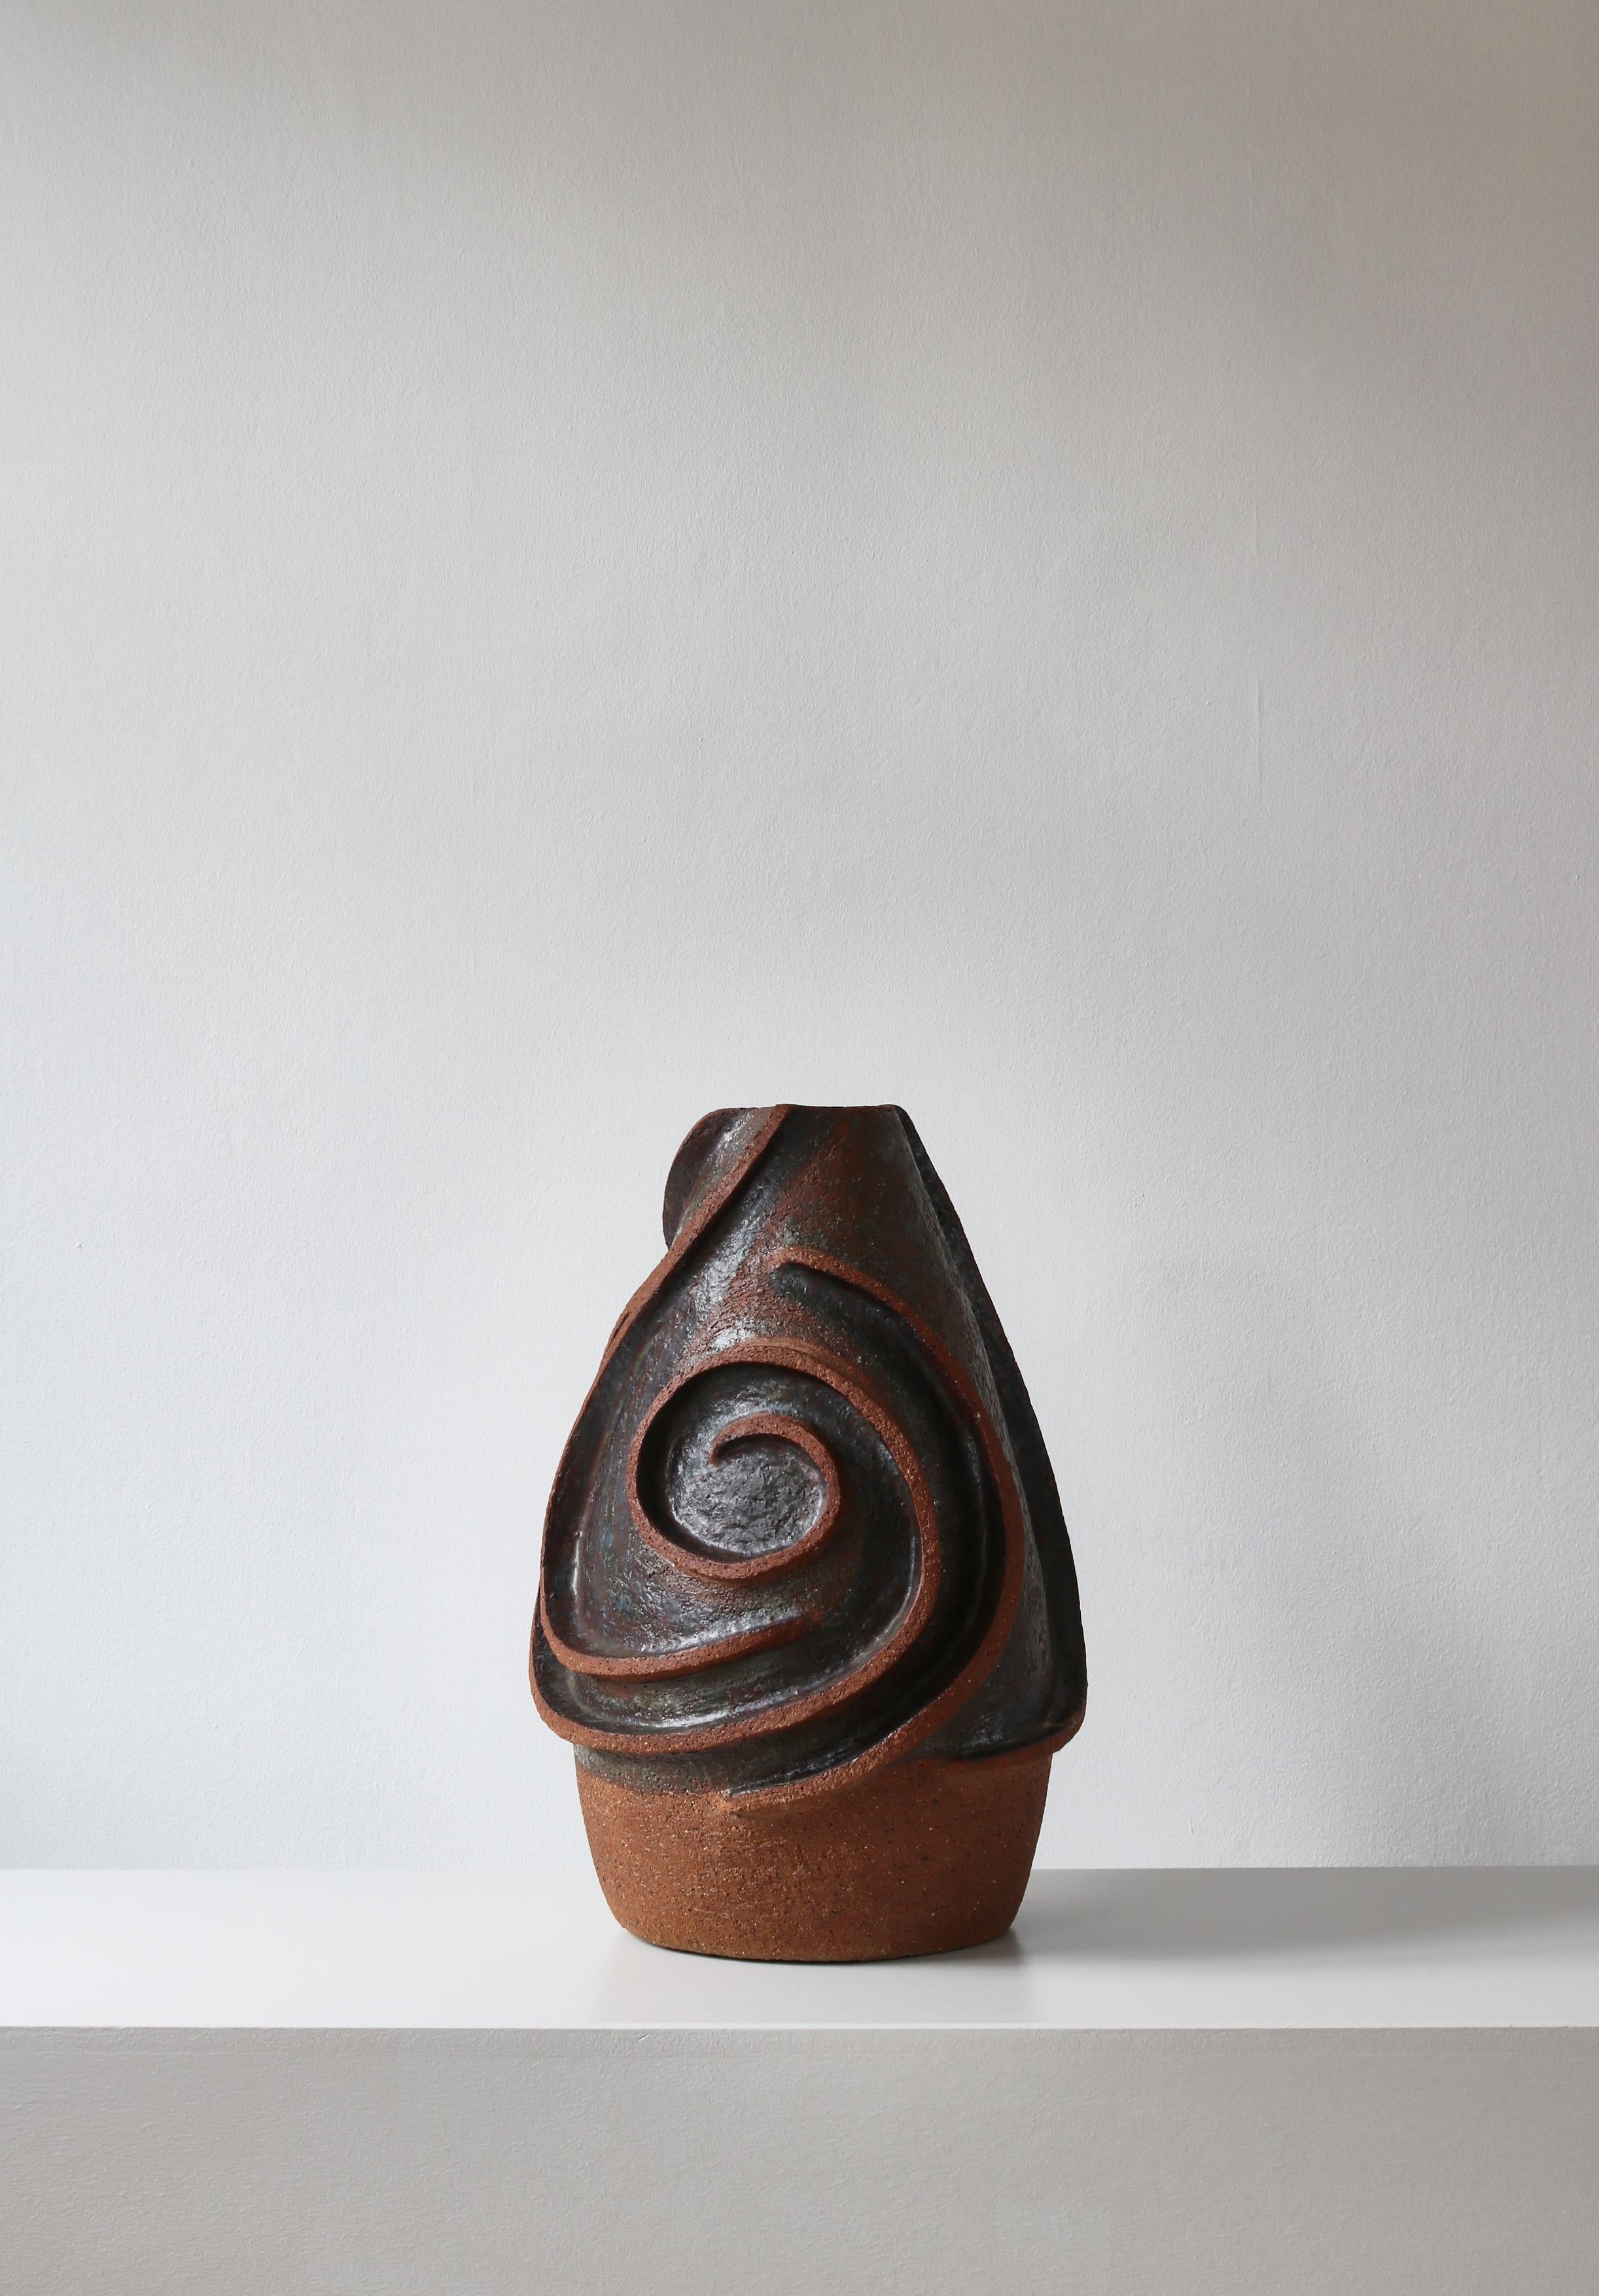 Amazing large handmade ceramic sculptural vase made in Denmark in the 1960s. Made in chamotte clay and partly glazed in earth colored glazing.